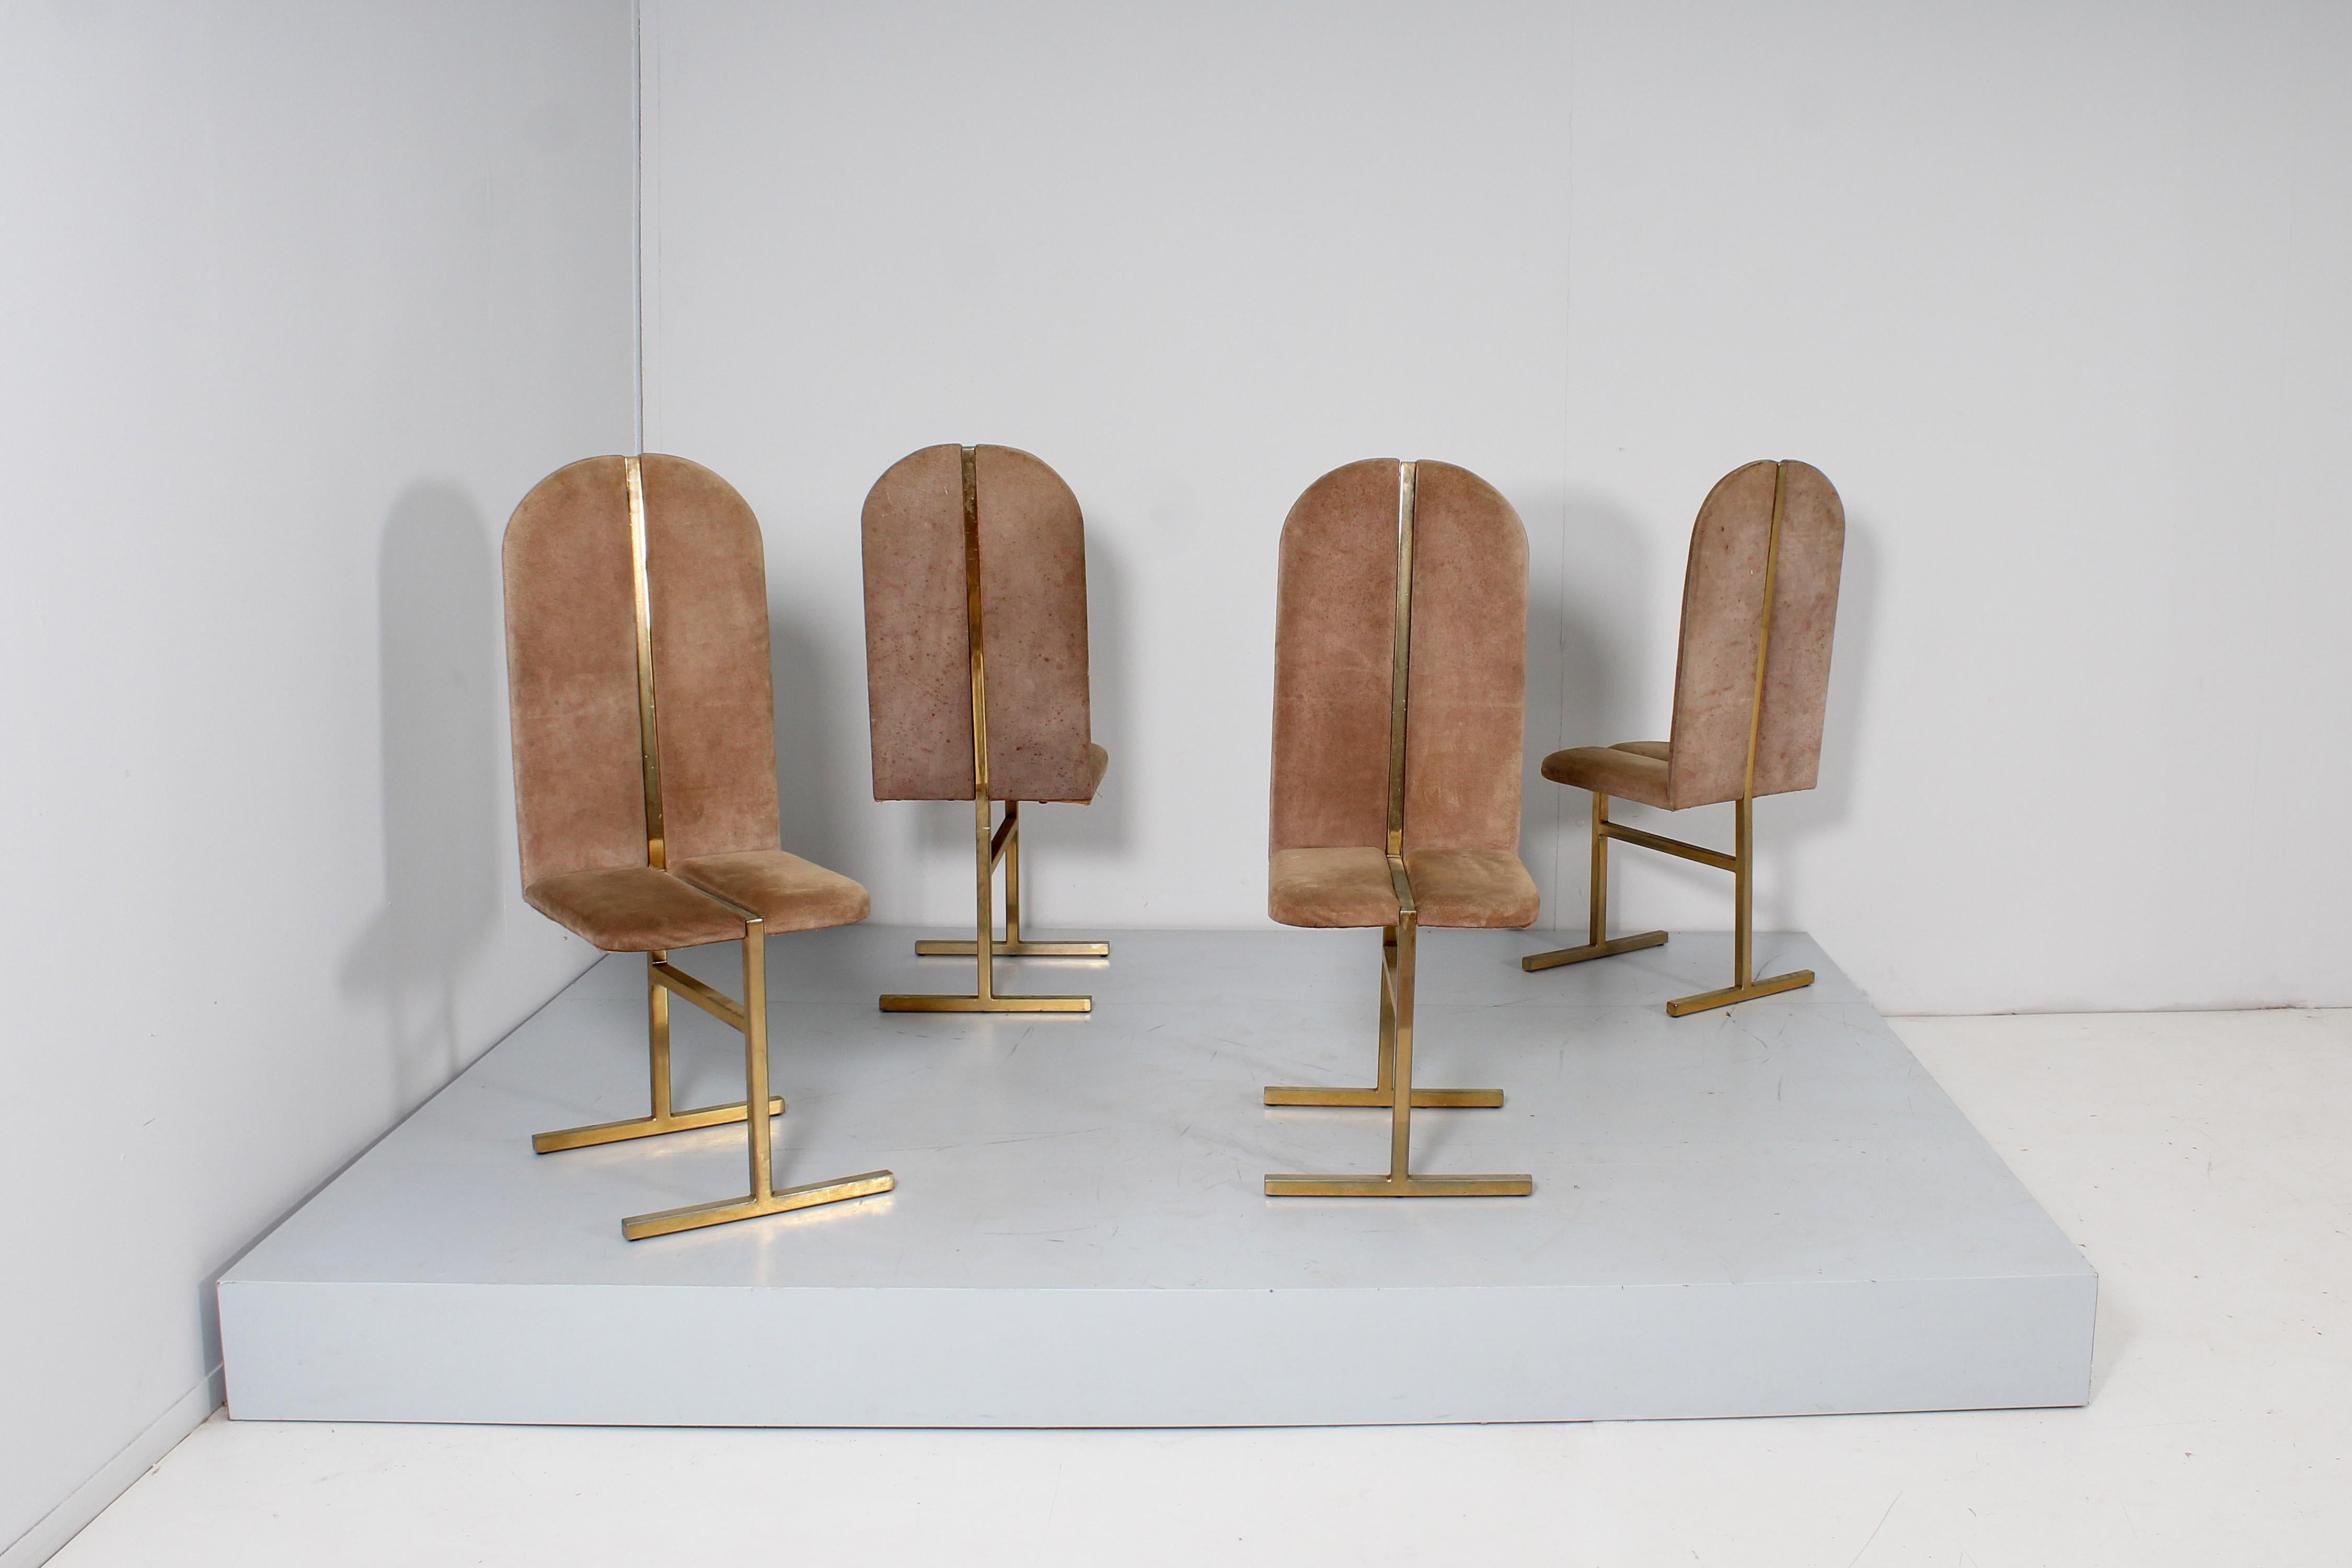 Italian Mid-Century Turri Milano Set of 4 Brass and Suede Chairs, Italy, 70s